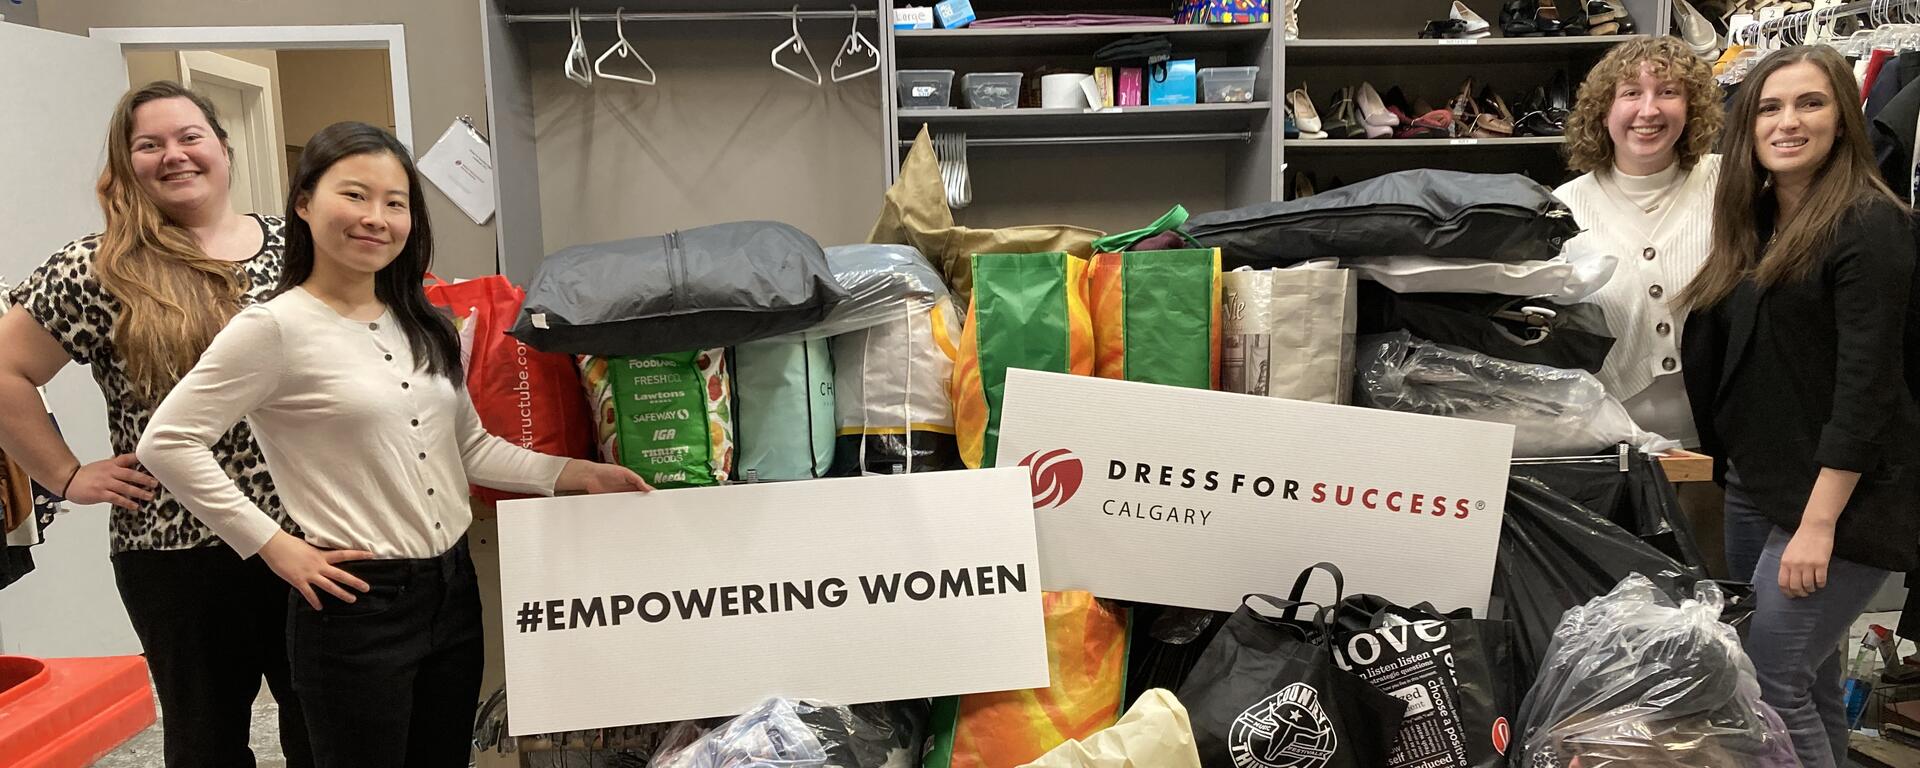 Donations to Dress for Success